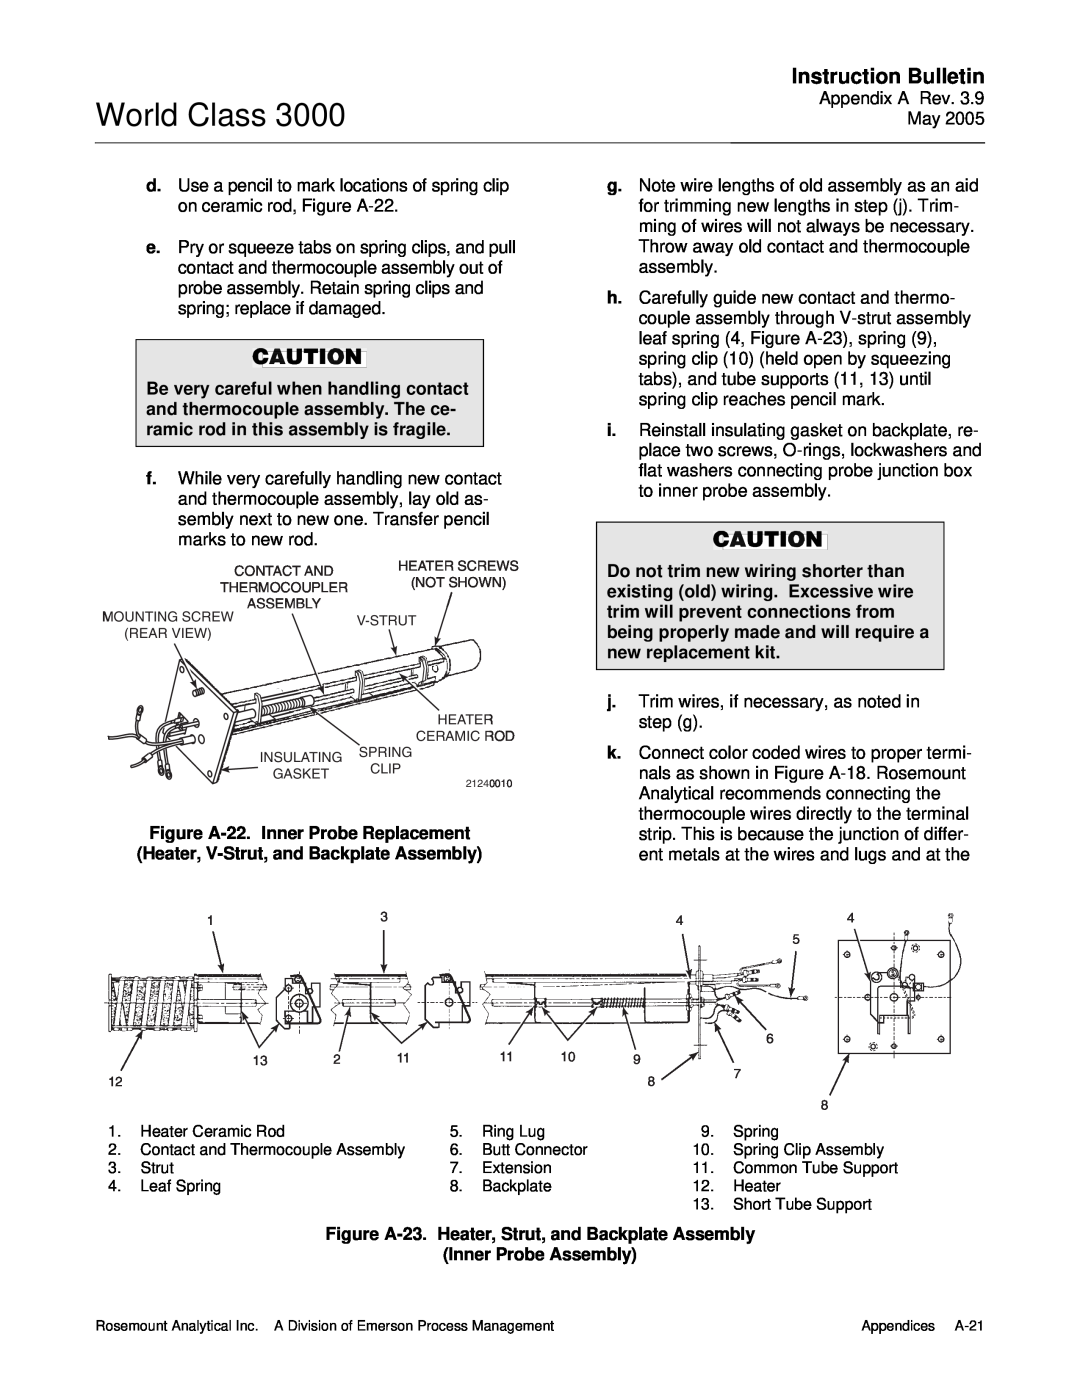 Emerson 3000 World Class, Instruction Bulletin, Figure A-23.Heater, Strut, and Backplate Assembly, Inner Probe Assembly 